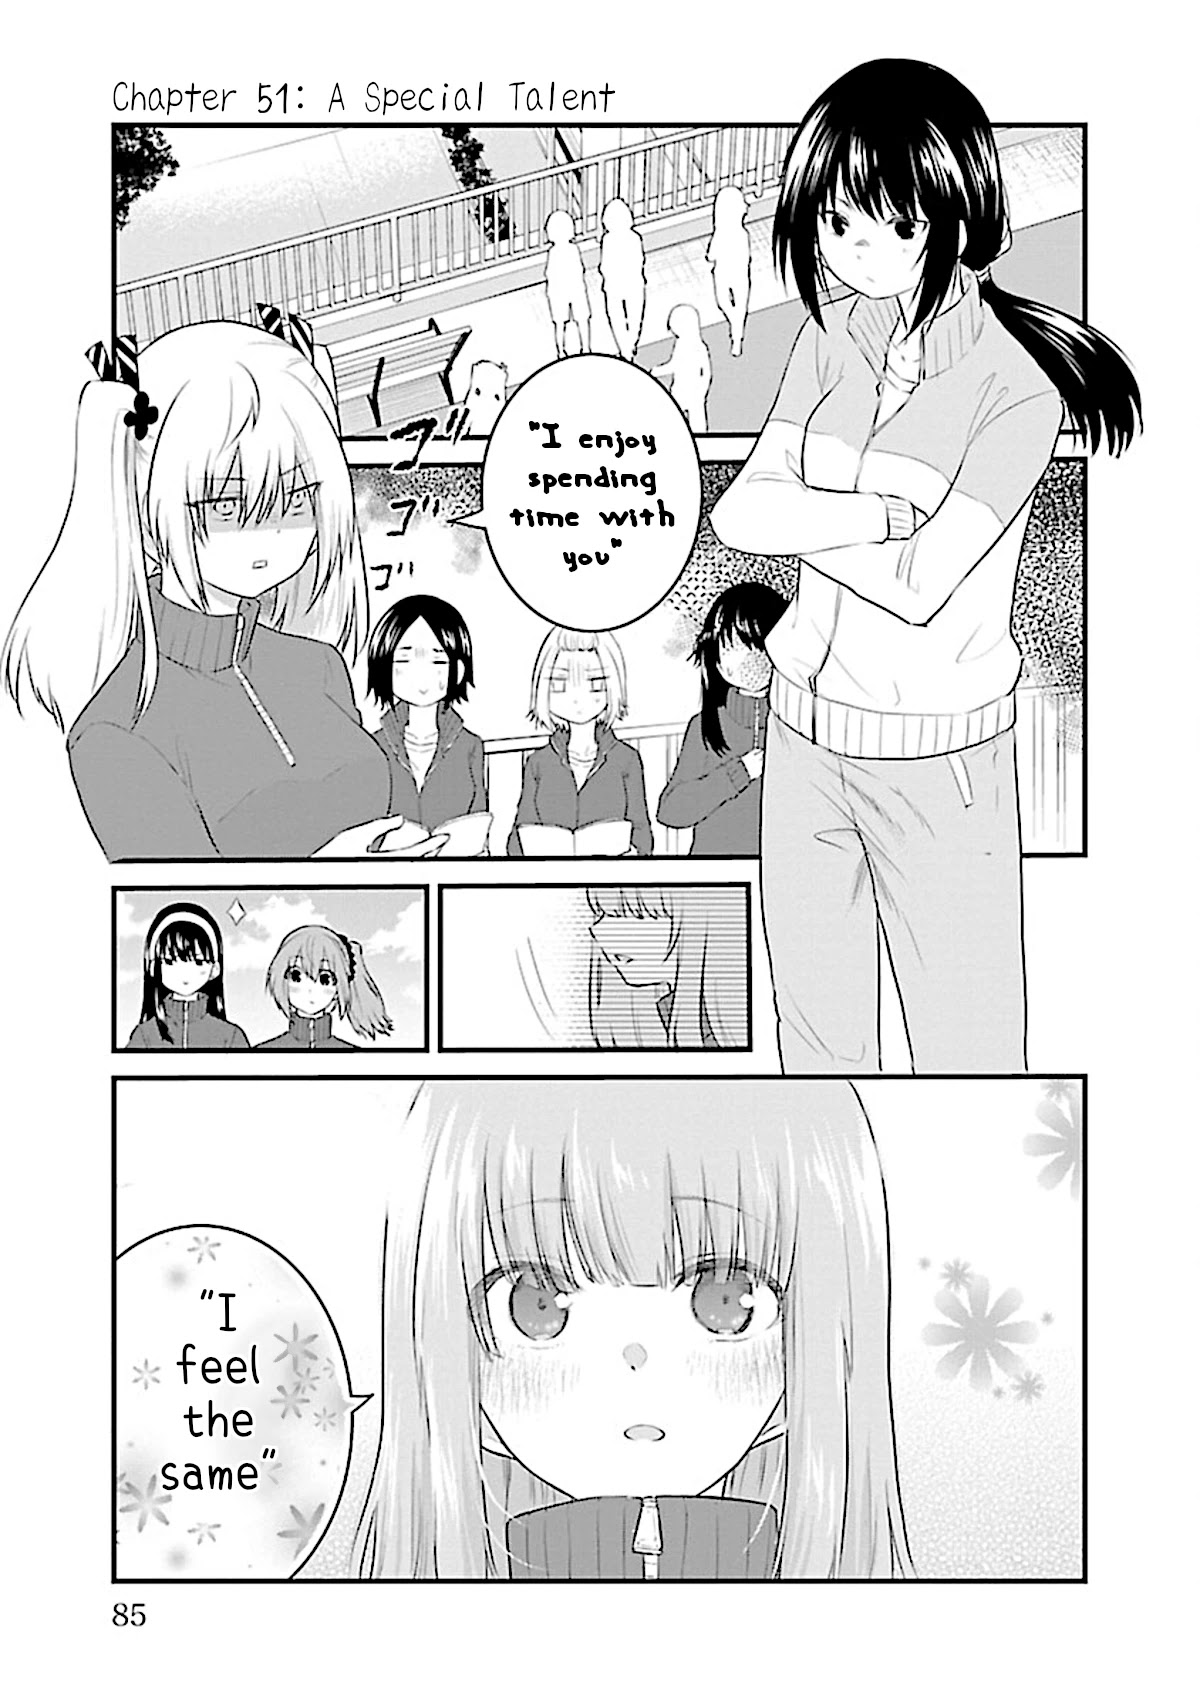 The Mute Girl And Her New Friend (Serialization) Chapter 51: A Special Talent - Picture 1